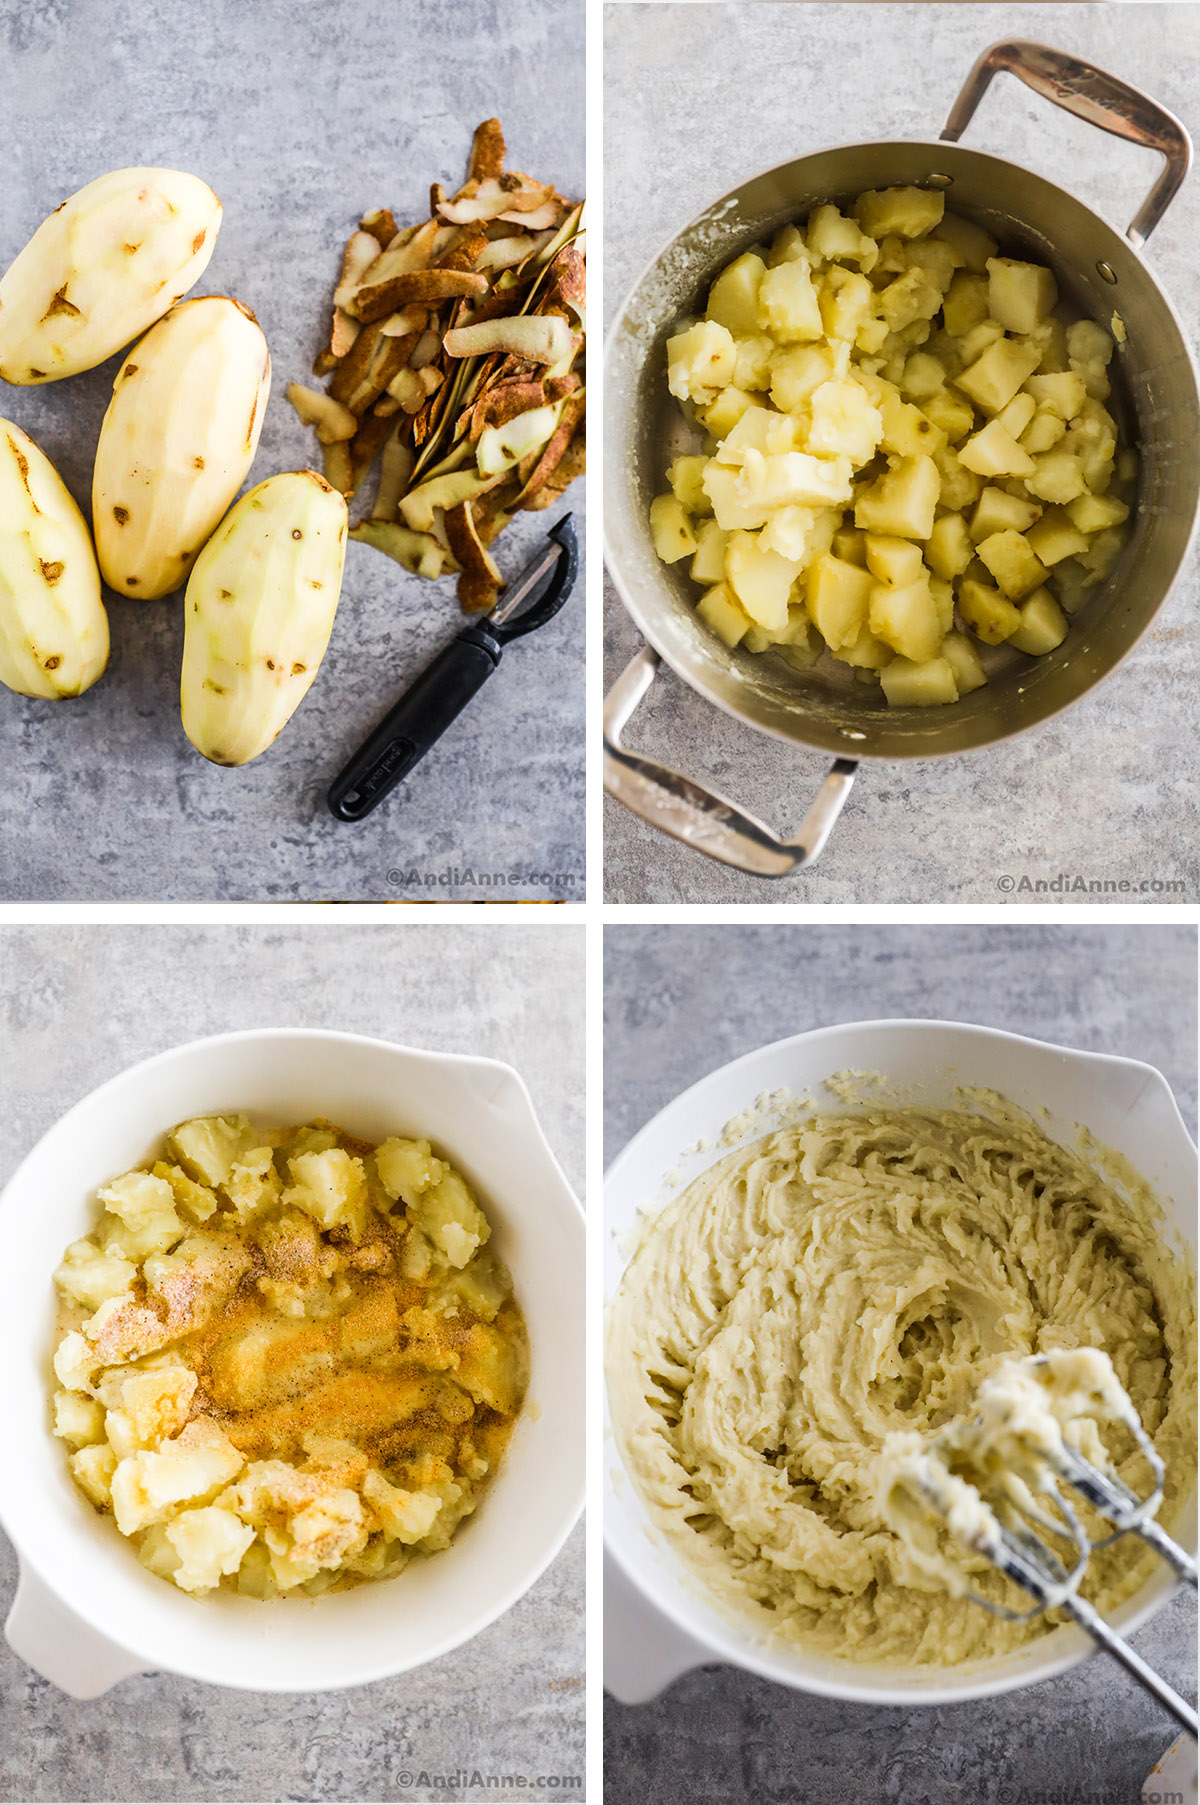 Four images showing steps to make the recipe. First is peeled russet potatoes with skins and vegetable peeler beside it. A pot of cooked potatoes, A bowl with mashed potatoes, milk, and spices, and bowl with creamy mashed potatoes and hand mixer.